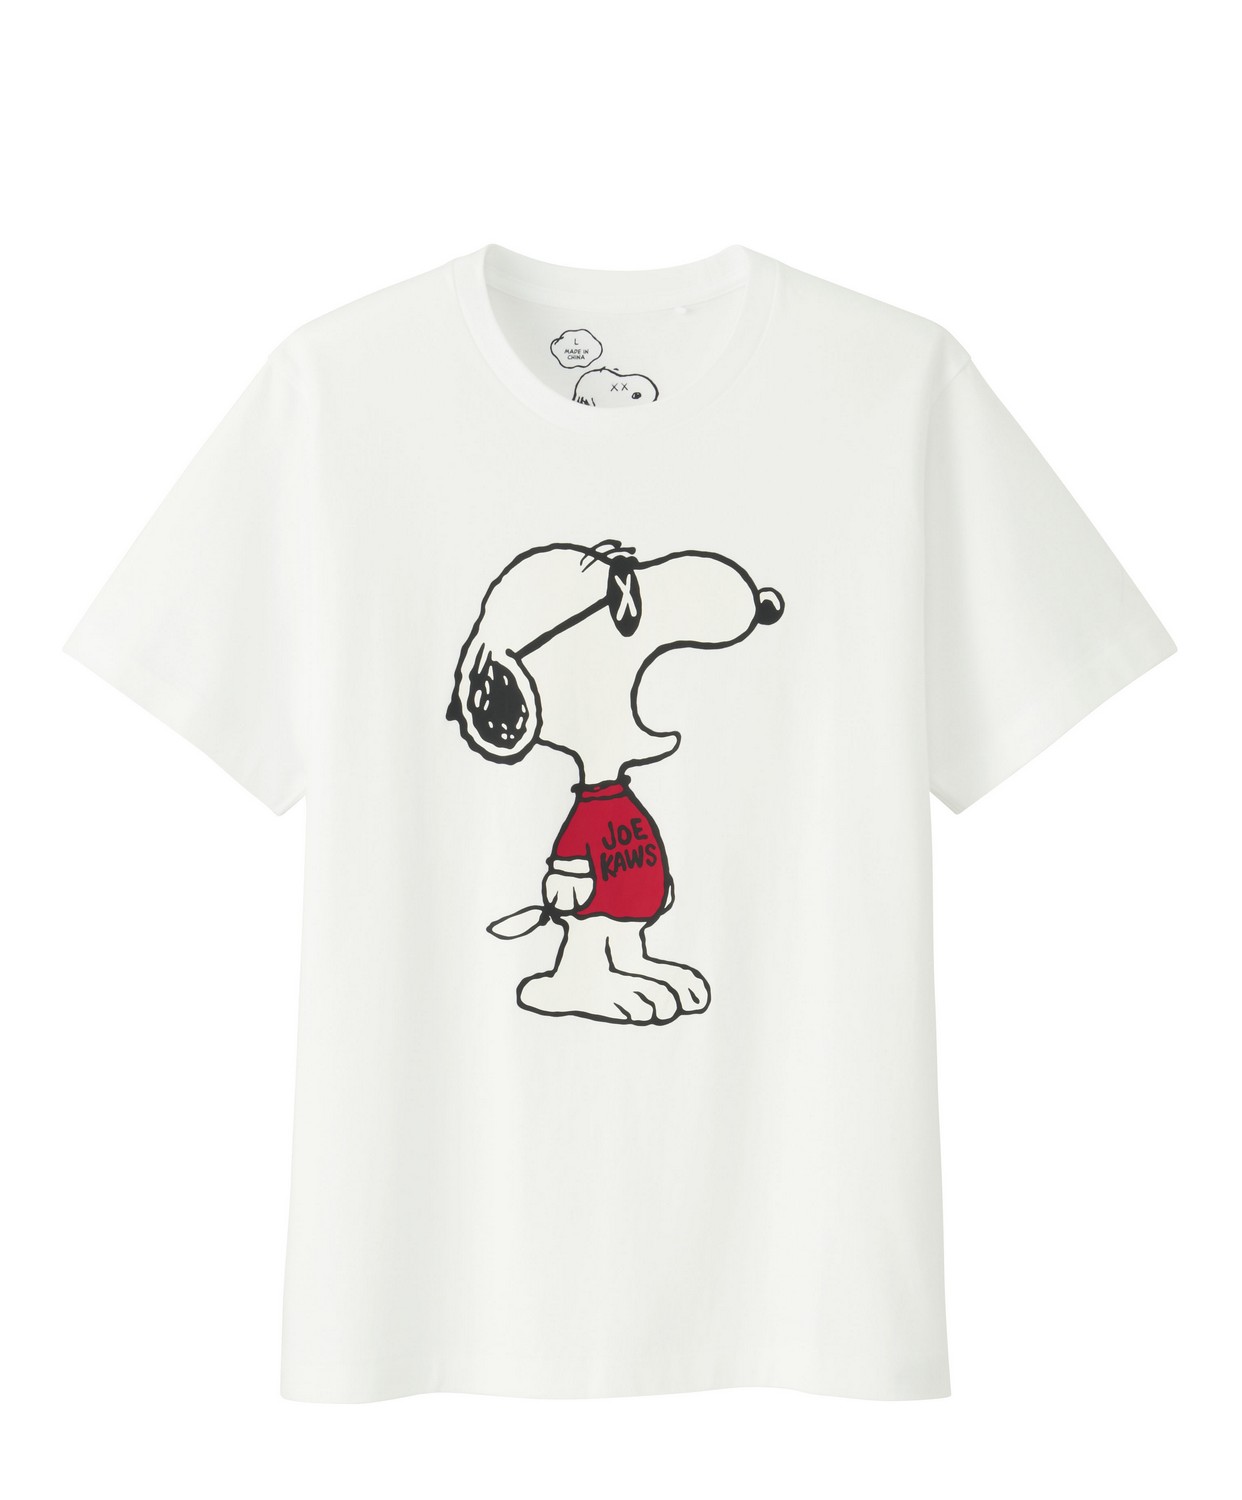 Uniqlo releases all the details on its KAWS and Peanuts collaboration